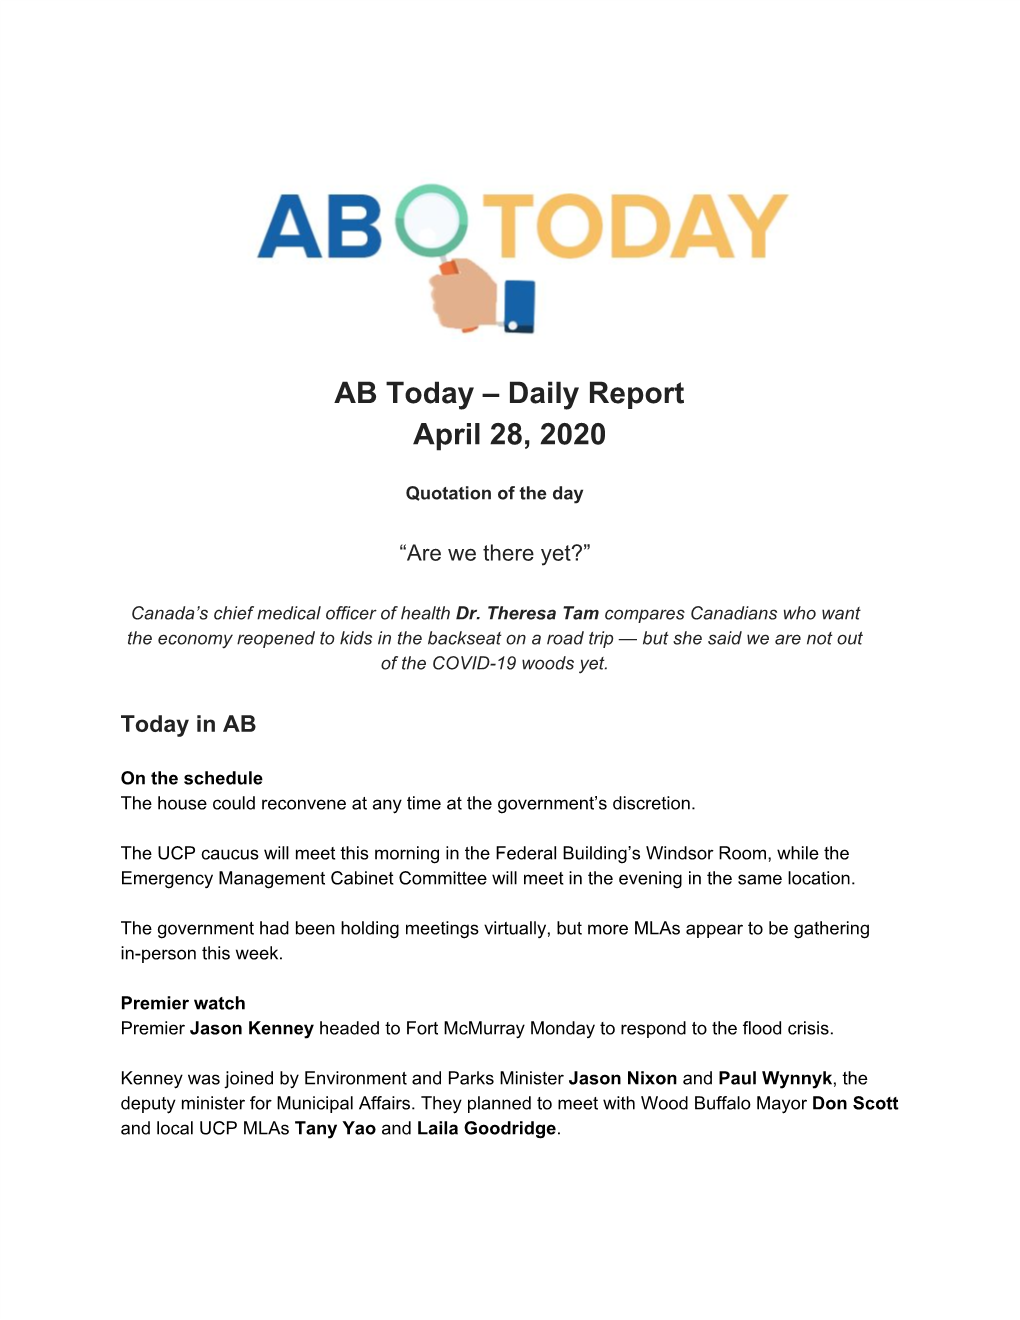 AB Today – Daily Report April 28, 2020